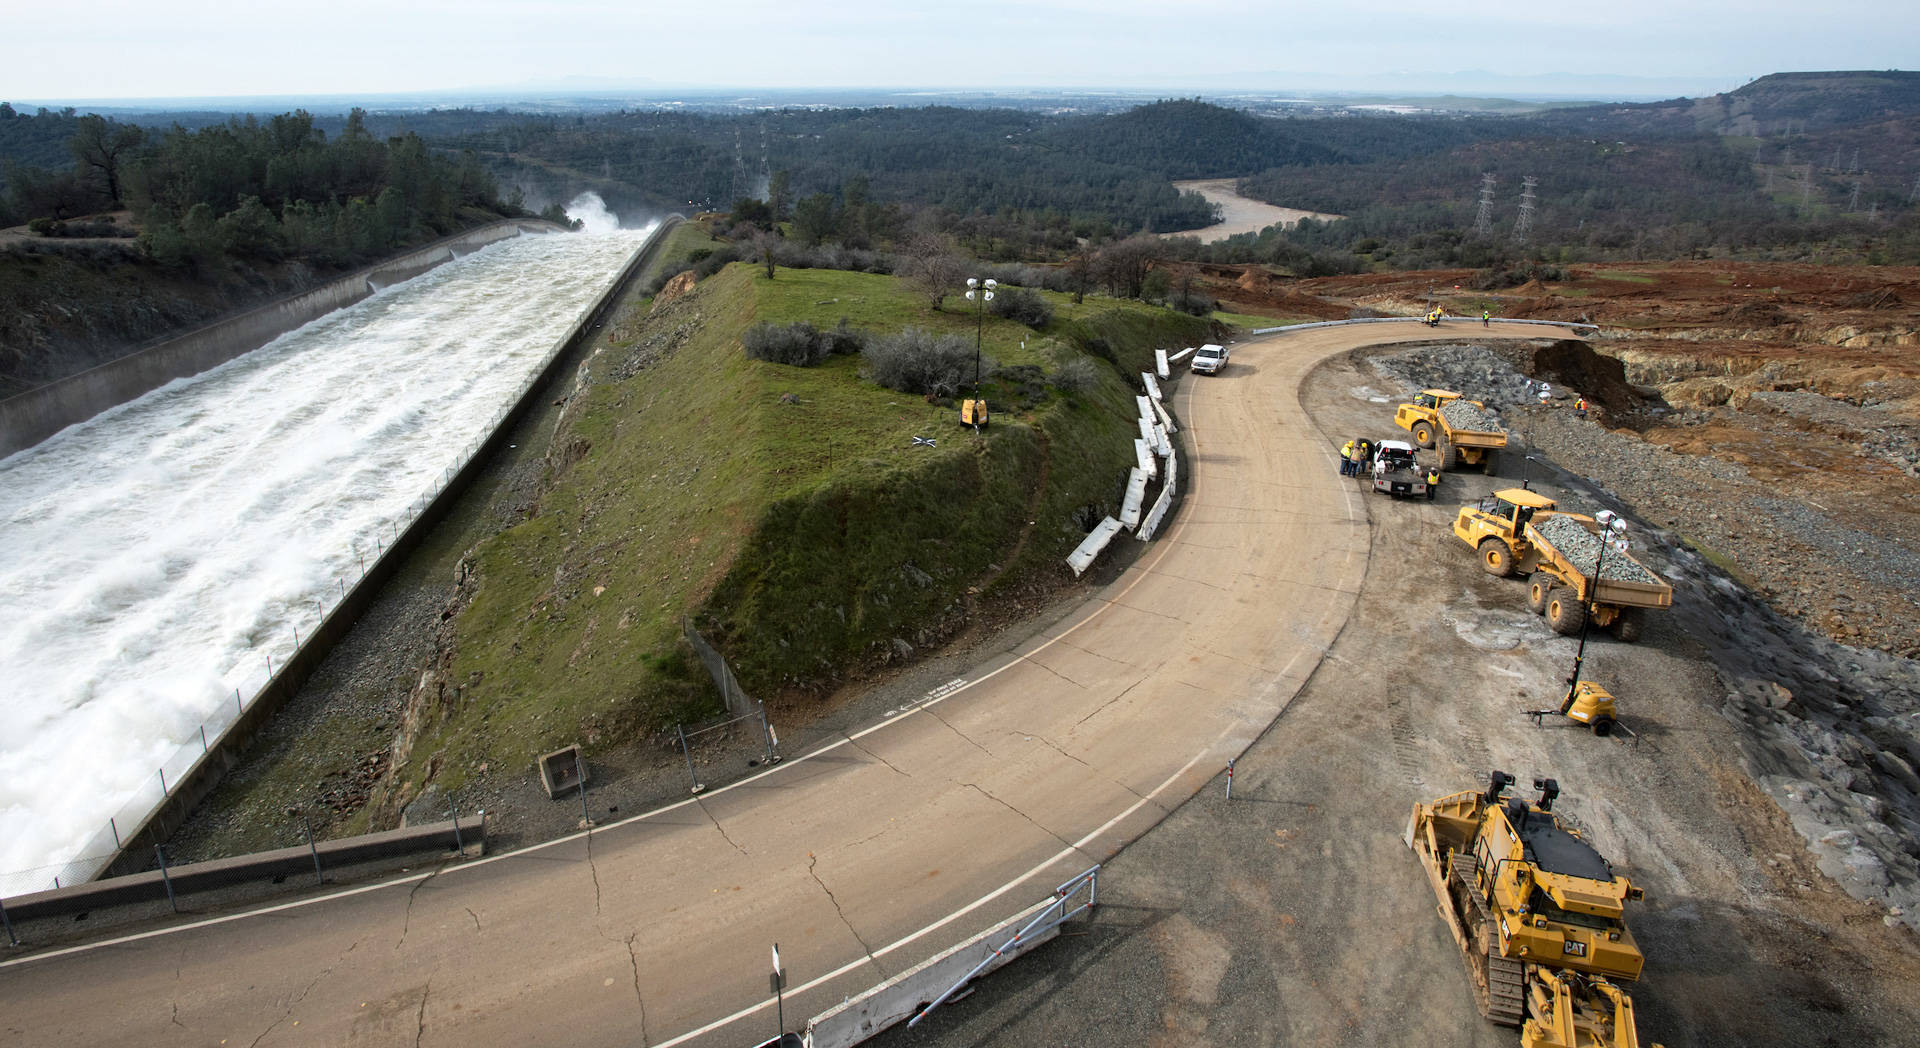 The state Department of Water Resources continues to release 100,000 cubic feet per second (cfs) of water from the primary Oroville Spillway, while crews inspect and evaluate the erosion just below the emergency spillway site on Monday, Feb. 13. Kelly M. Grow/ California Department of Water